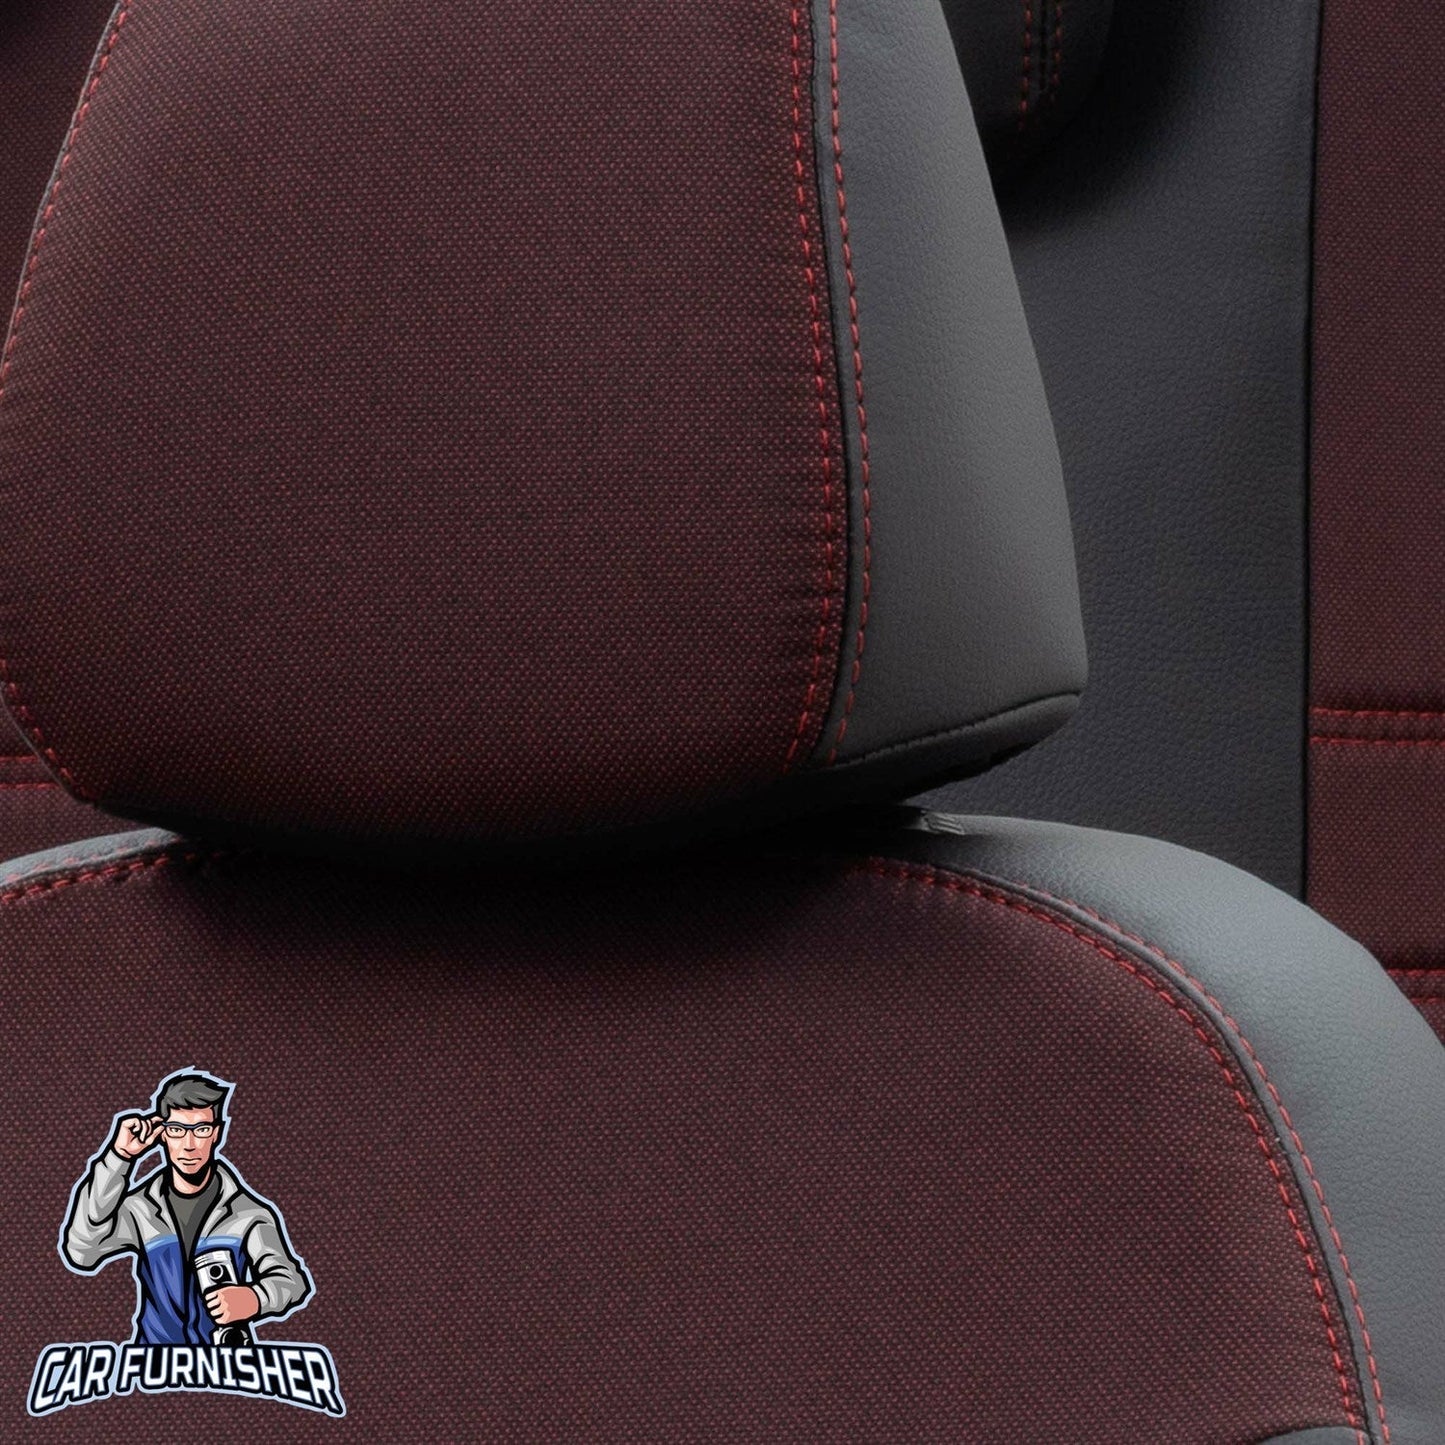 Geely Emgrand Seat Covers Paris Leather & Jacquard Design Red Leather & Jacquard Fabric